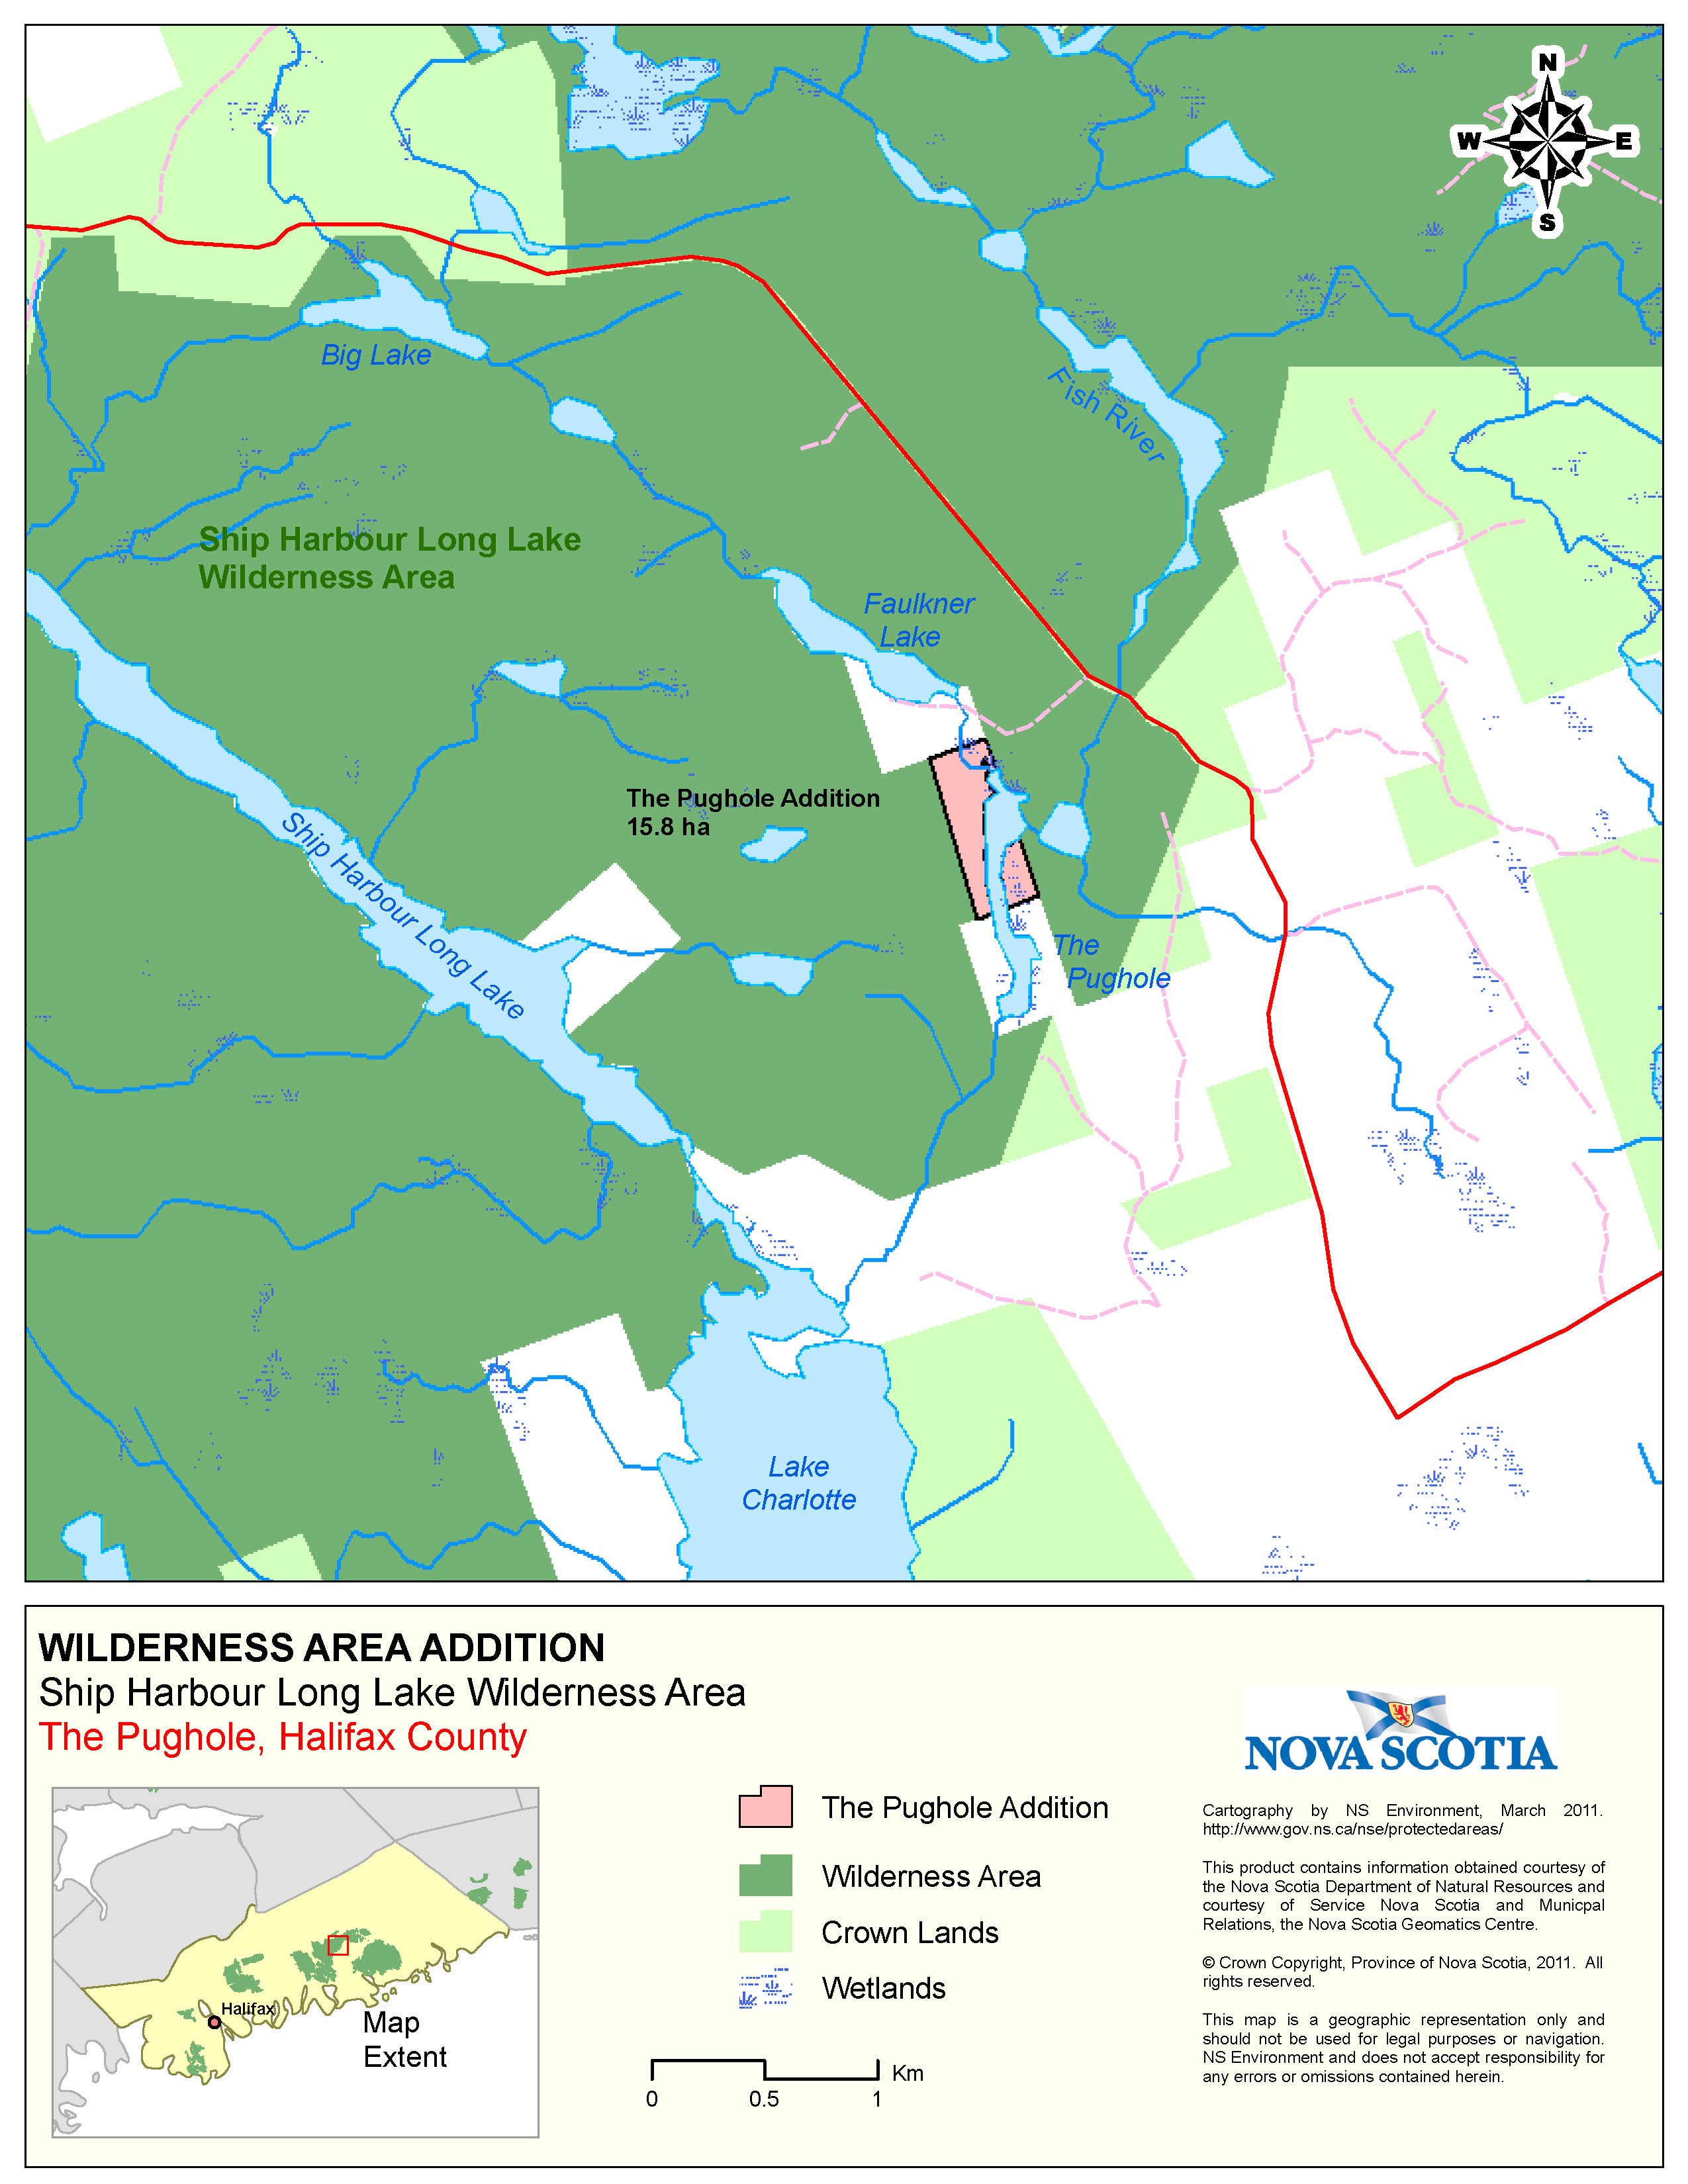 Graphic showing map of Boundaries of Crown Land at The Pughole, Halifax County Addition to Ship Harbour Long Lake Wilderness Area